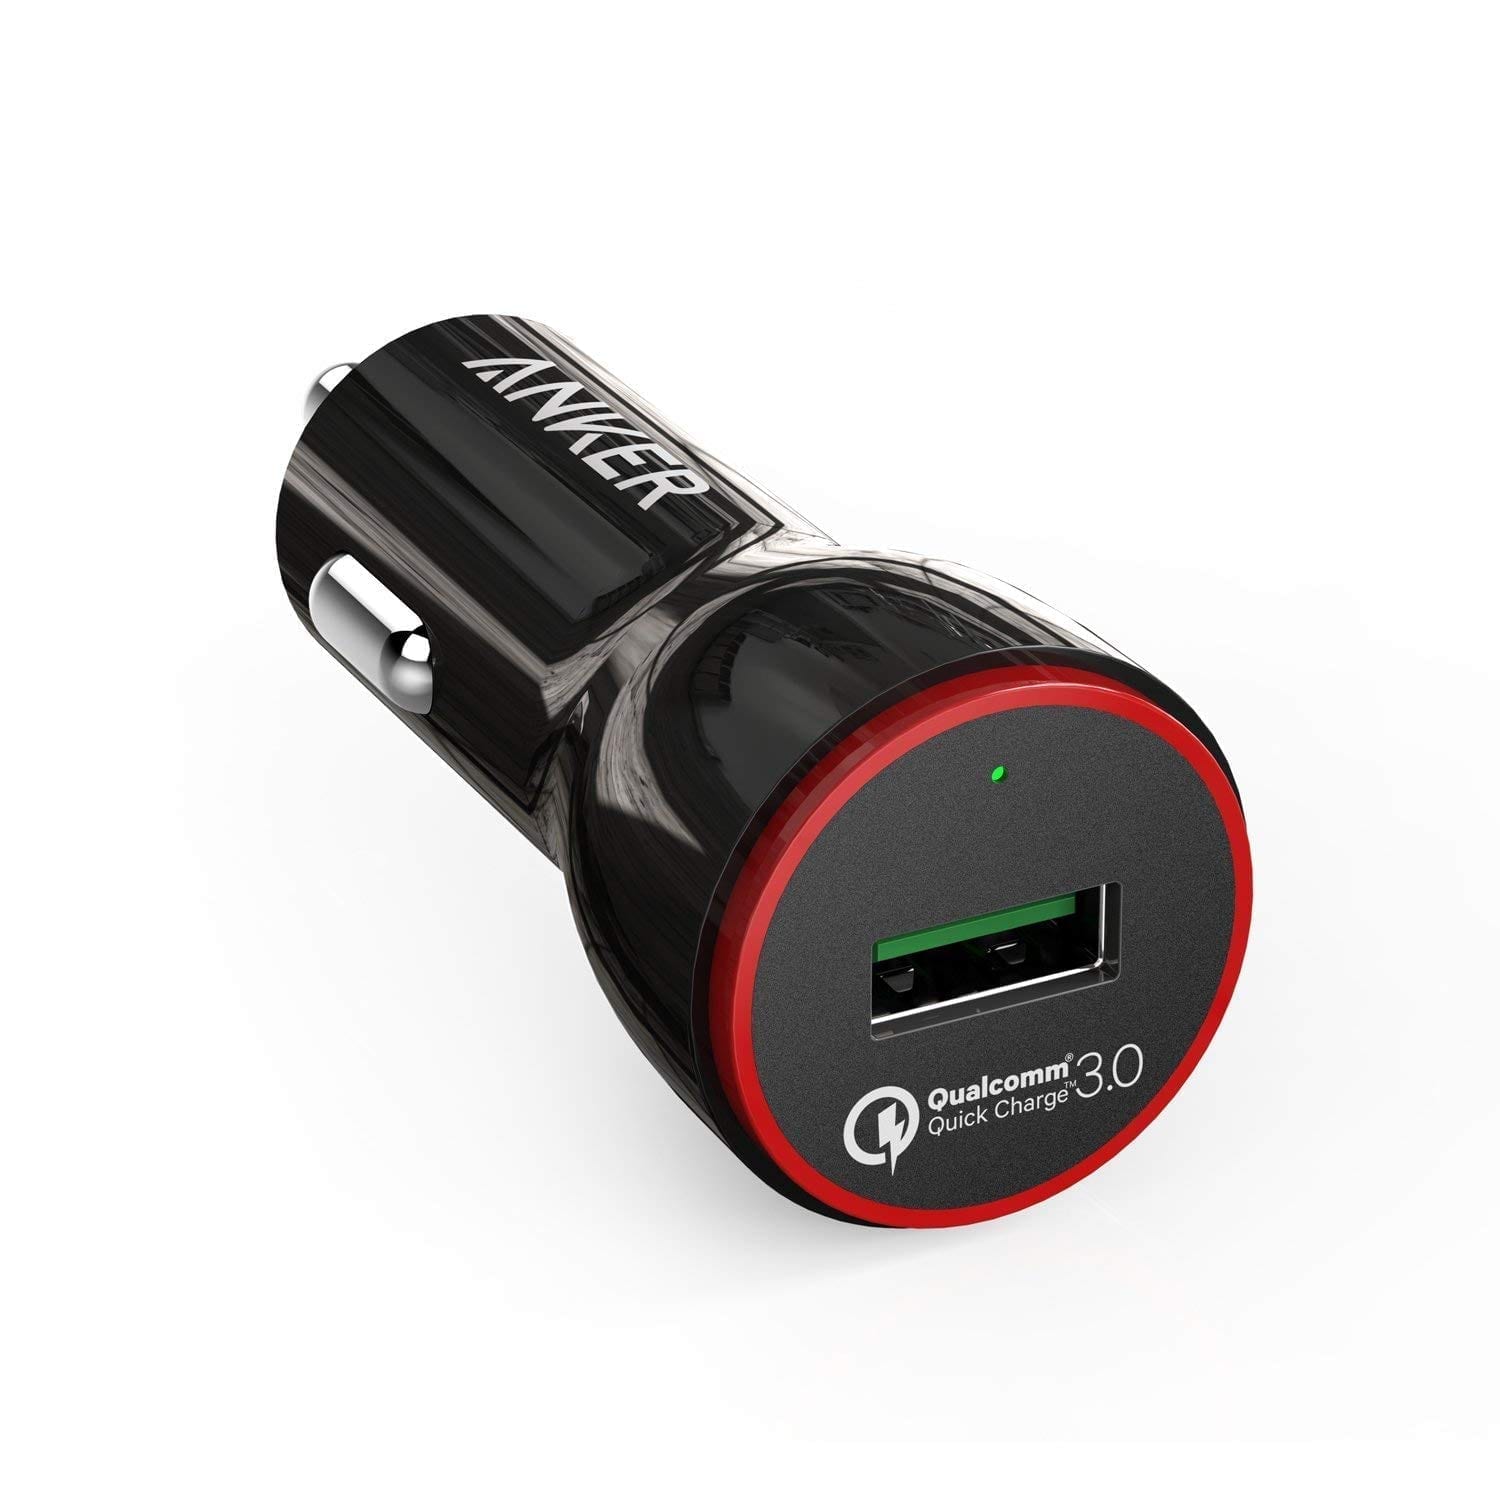 Anker Quick Charge 3.0 USB Car Charger front angle